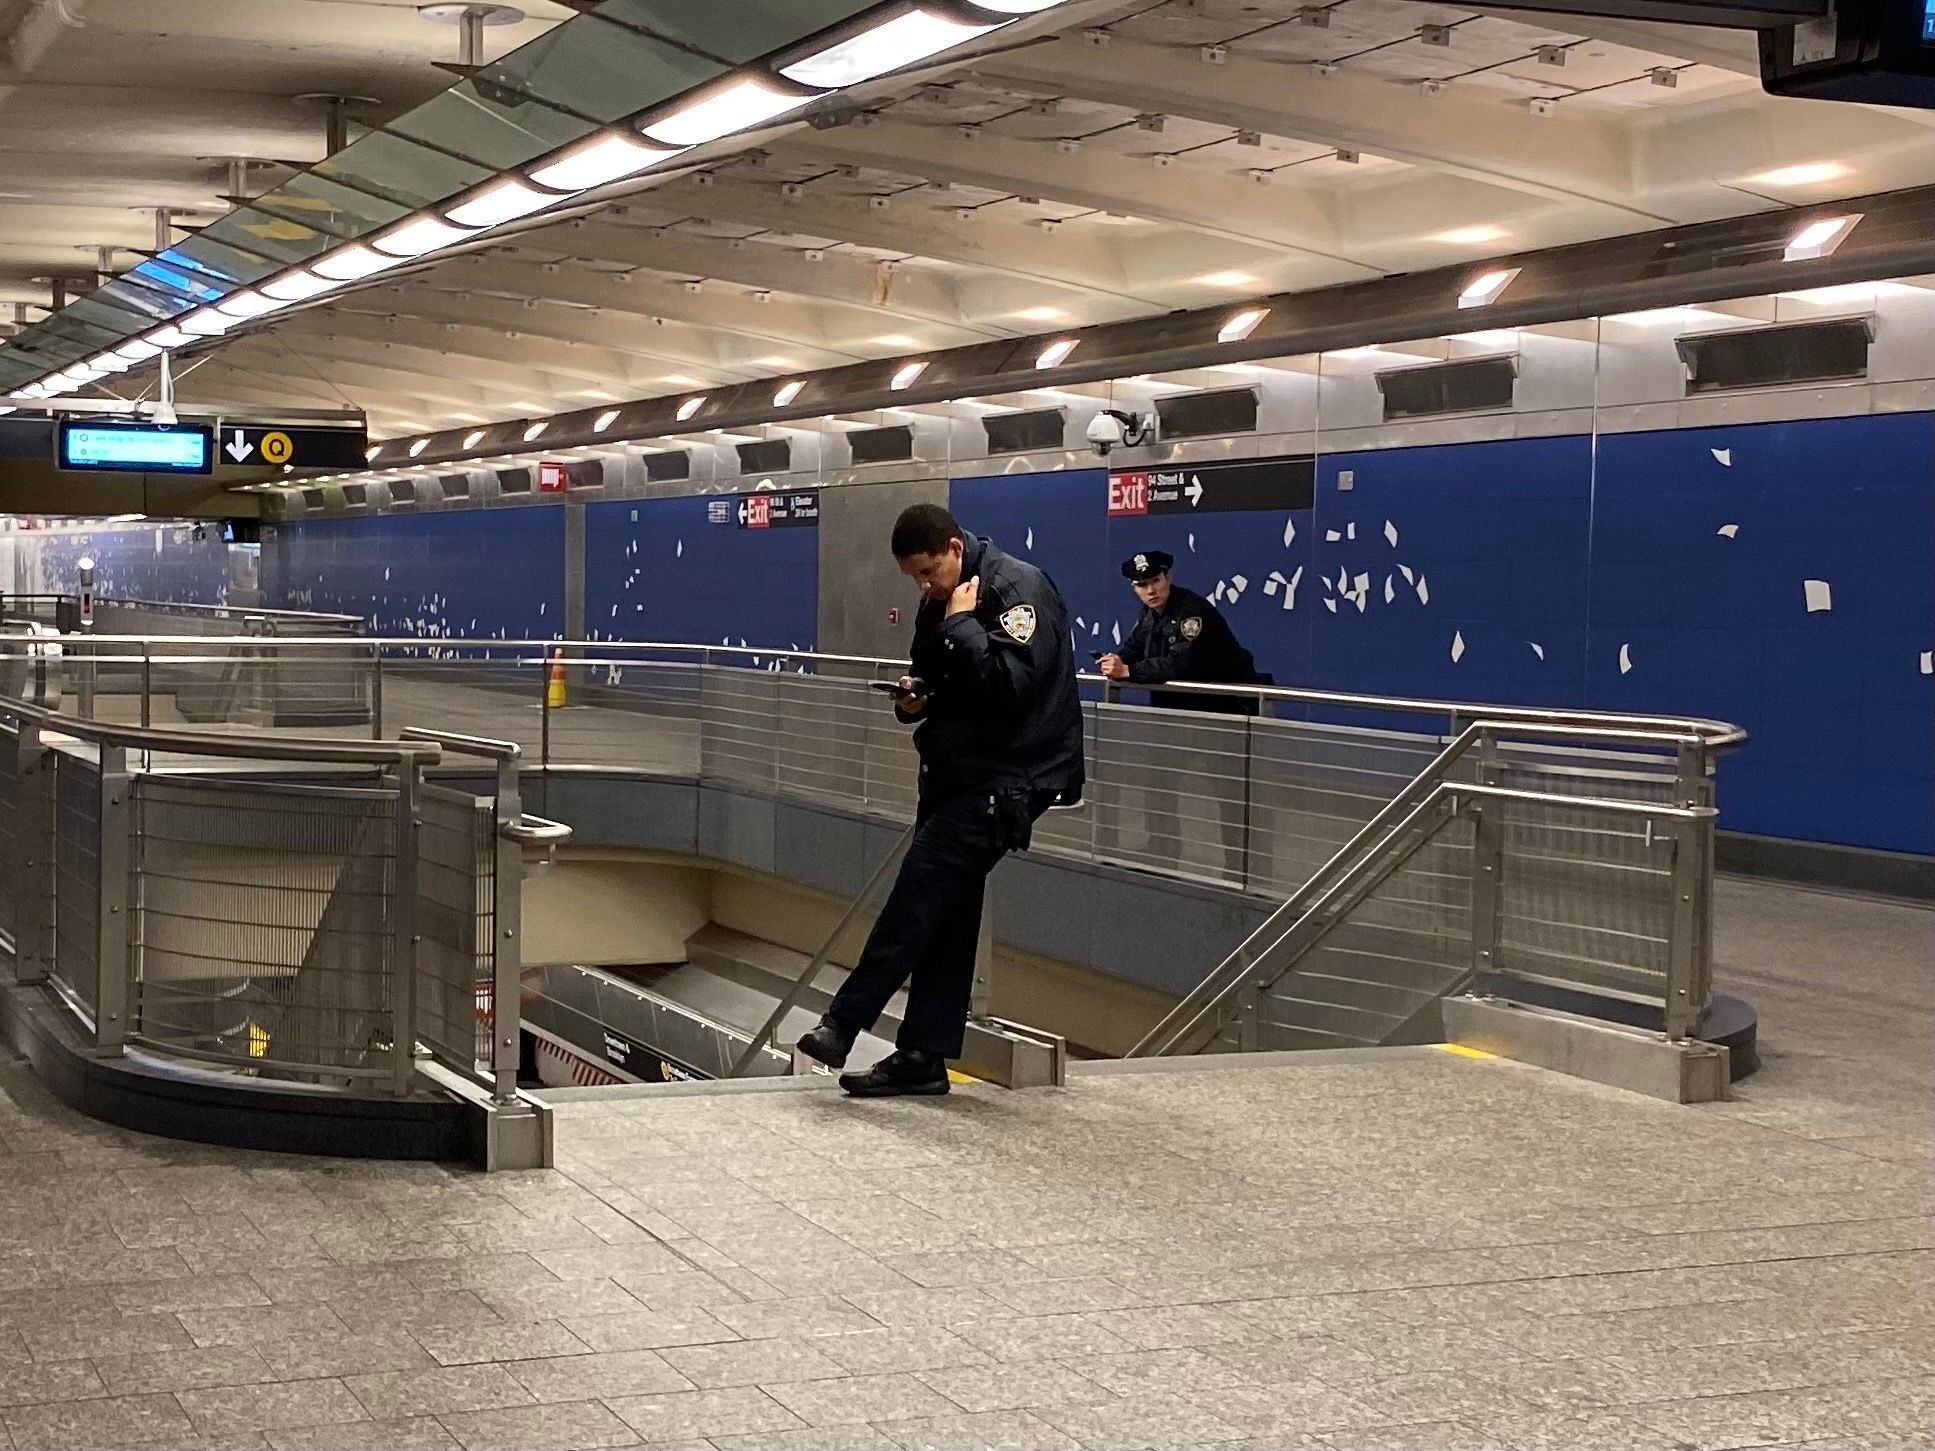 An NYPD officer atop a subway station stairwell looks at his phone while another NYPD officer behind him looks on